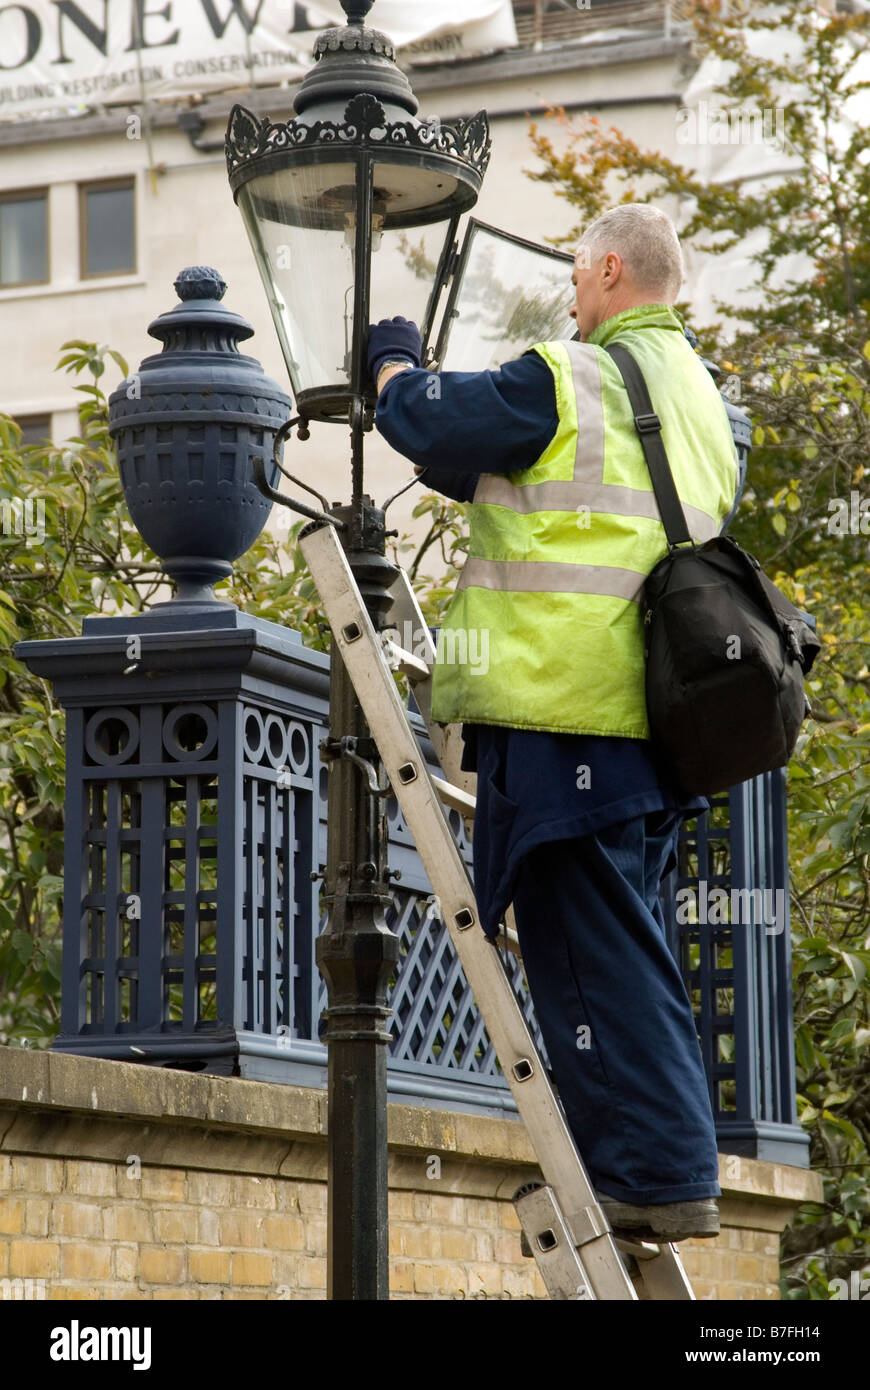 Workman servicing street lamps in Green Park, London Stock Photo